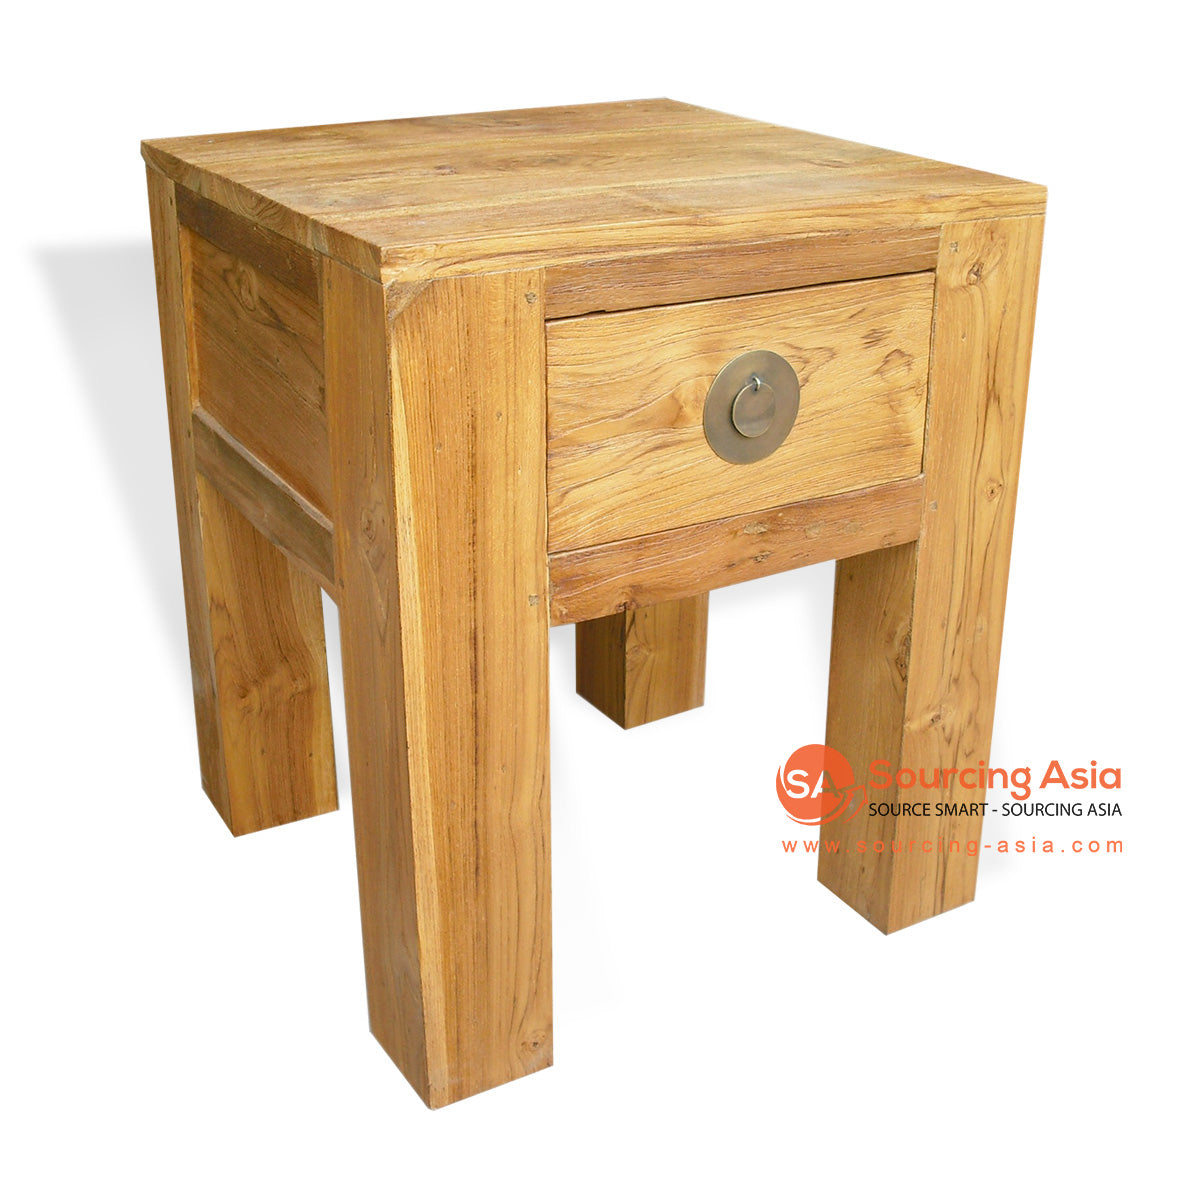 KYT60052 NATURAL RECYCLED TEAK WOOD ONE DRAWER RUSTIC SHANGI SIDE TABLE